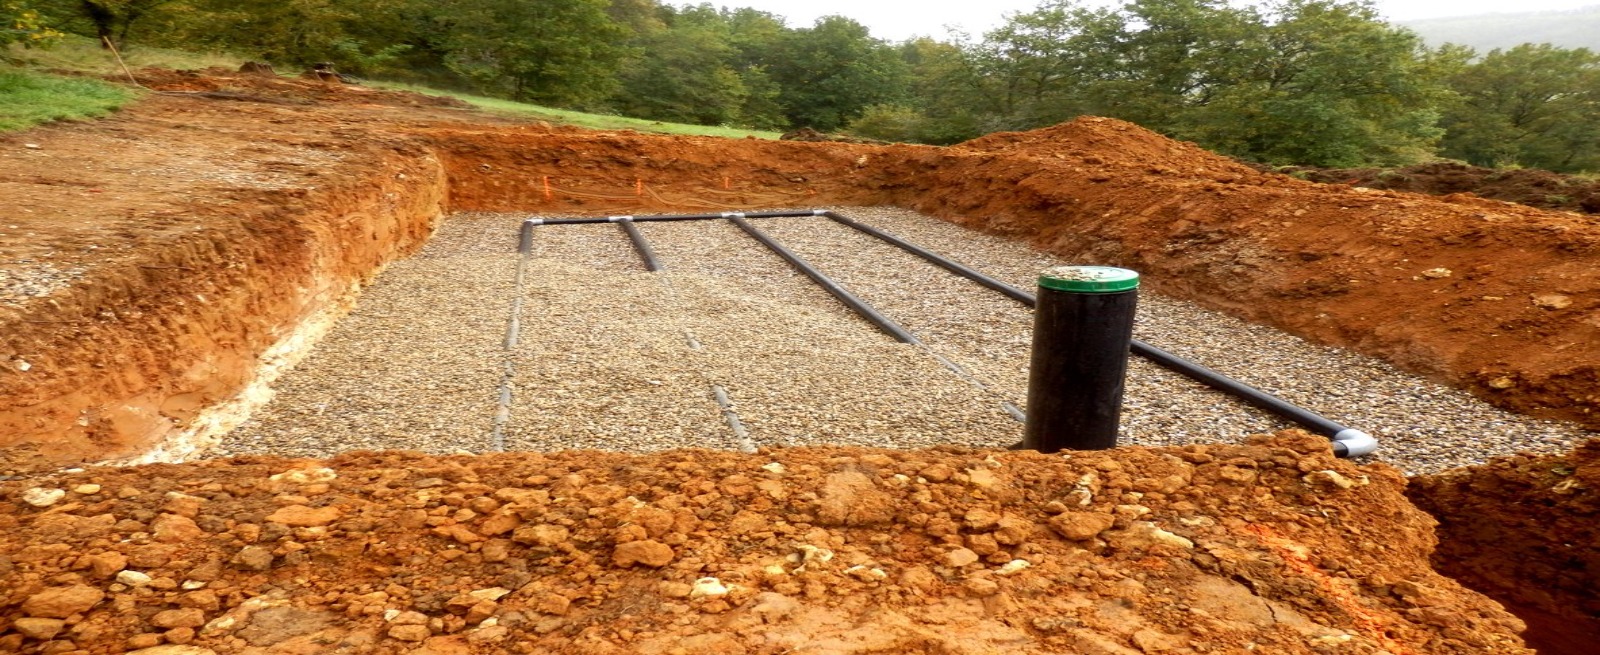 Septic System being installed